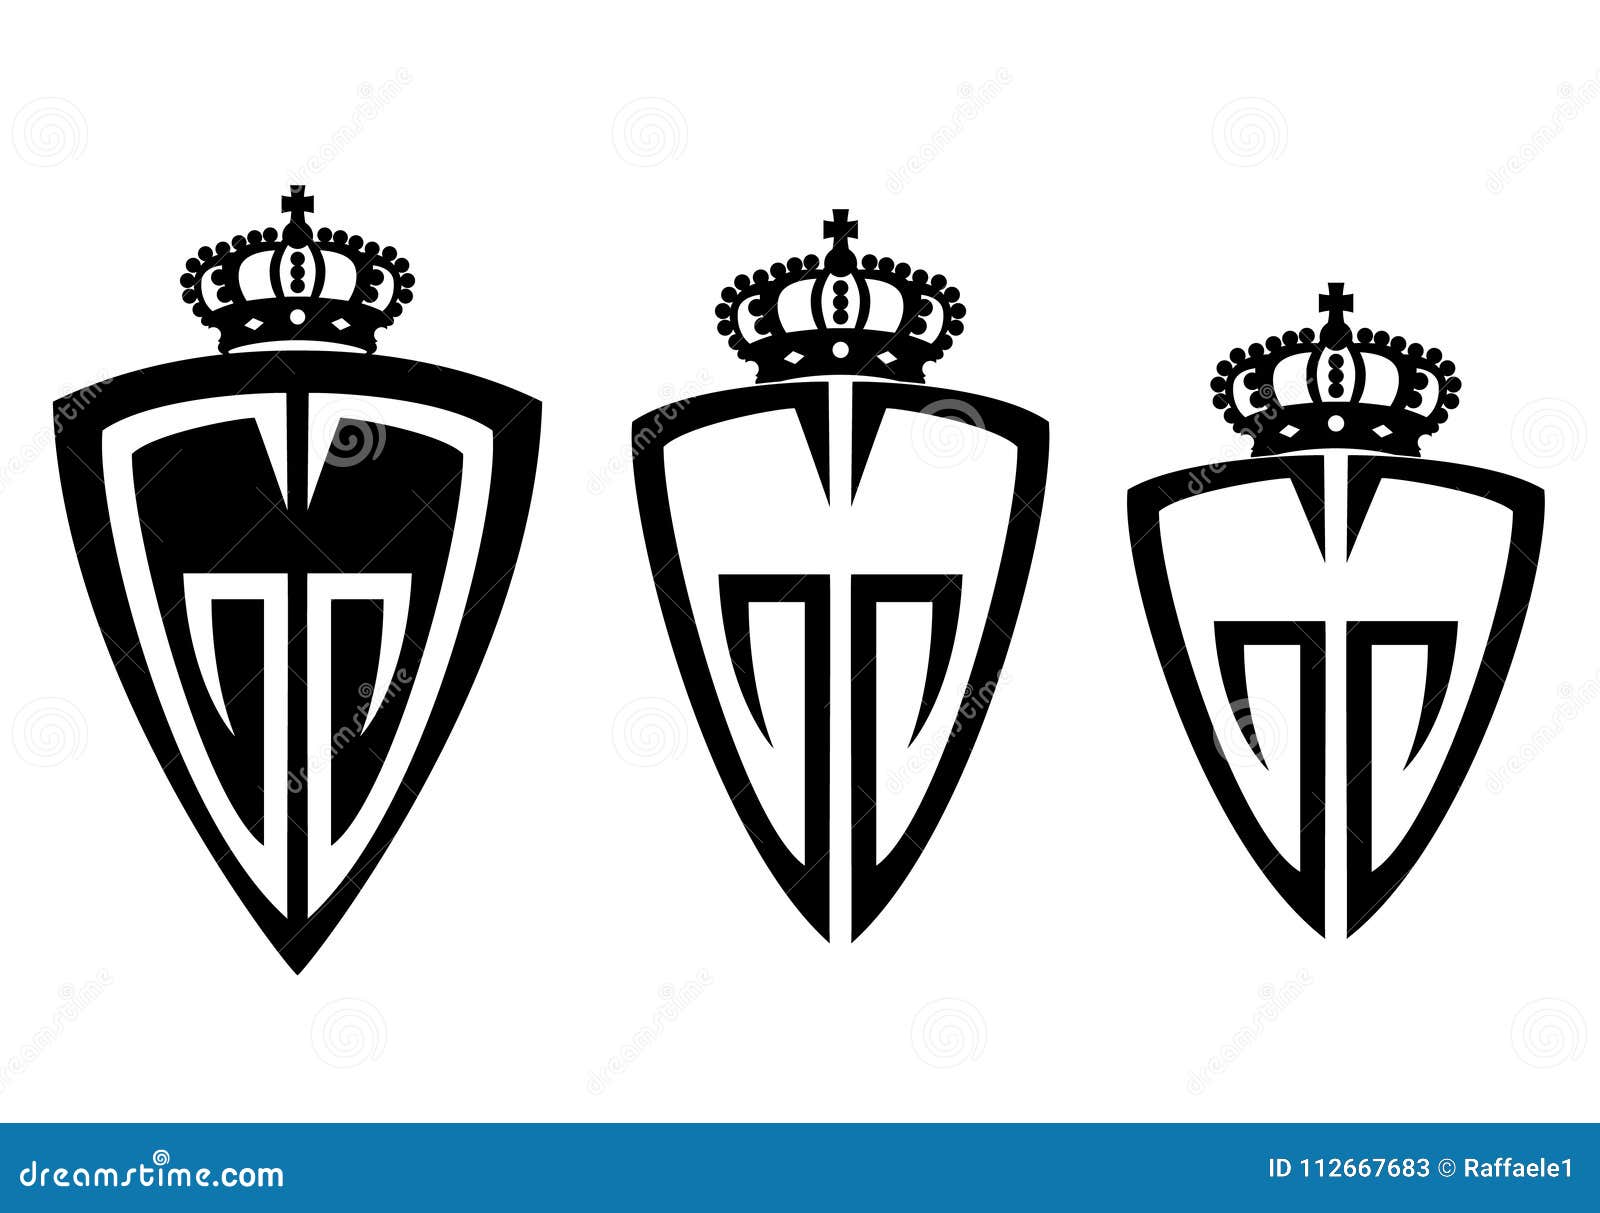 three shield logo with a crown